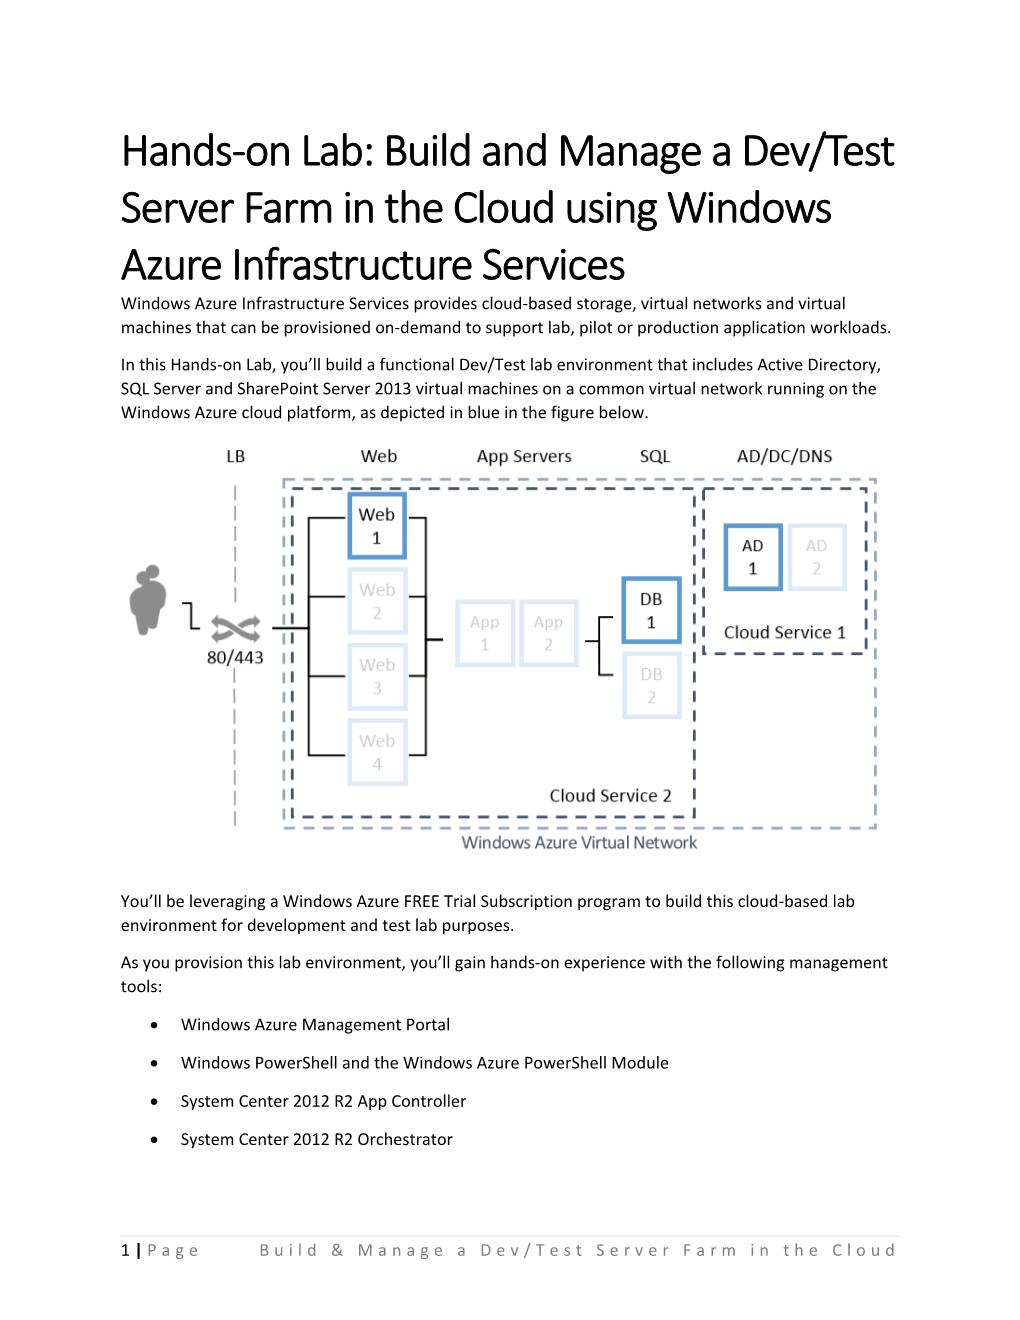 Hands-On Lab: Build and Manage a Dev/Test Server Farmin the Cloud Using Windows Azure